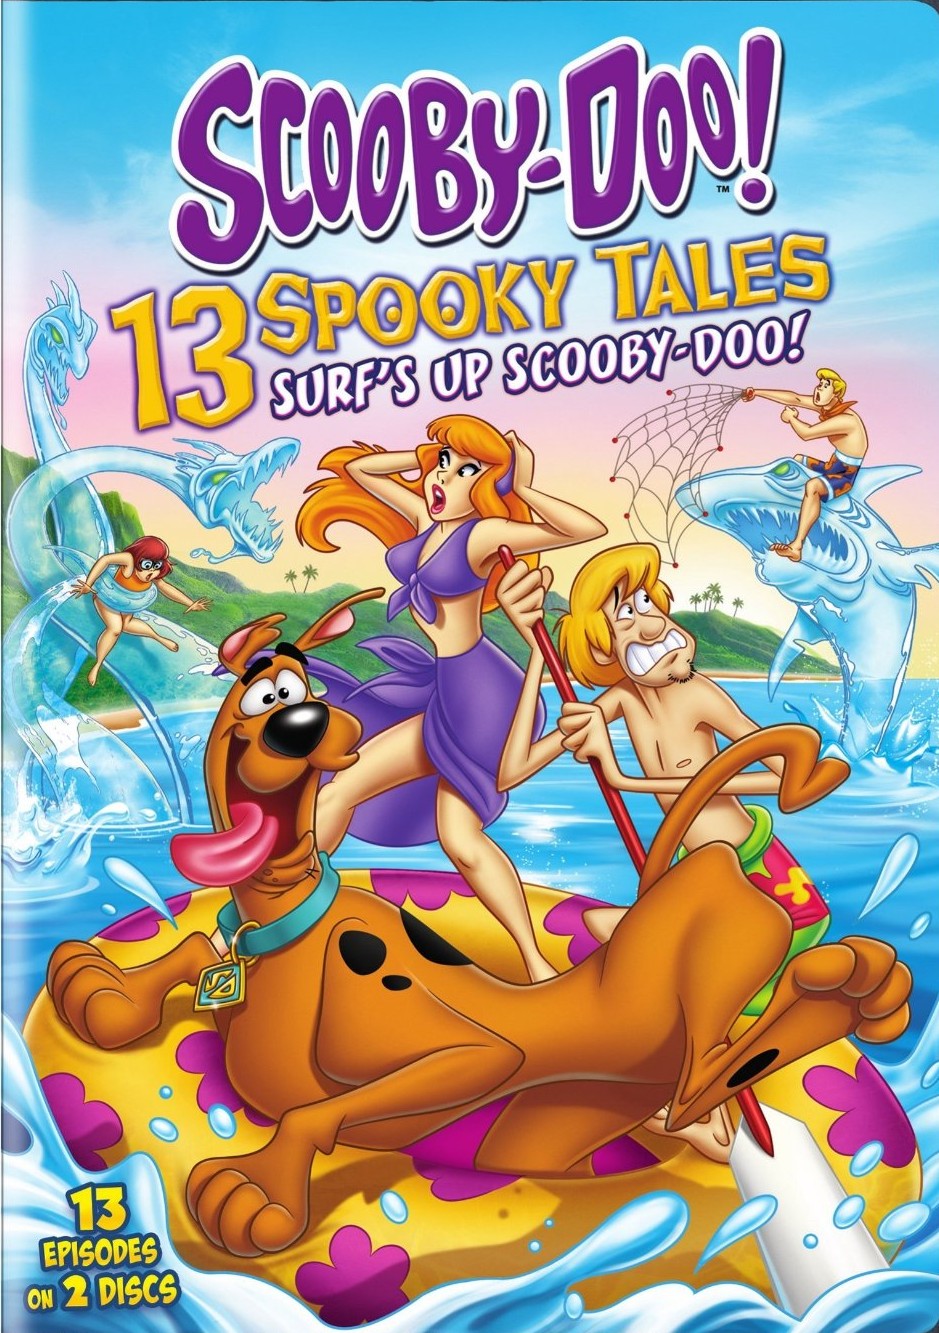 http://vignette4.wikia.nocookie.net/scoobydoo/images/7/76/13ST_SUSD_front_cover.jpg/revision/latest?cb=20150116145101